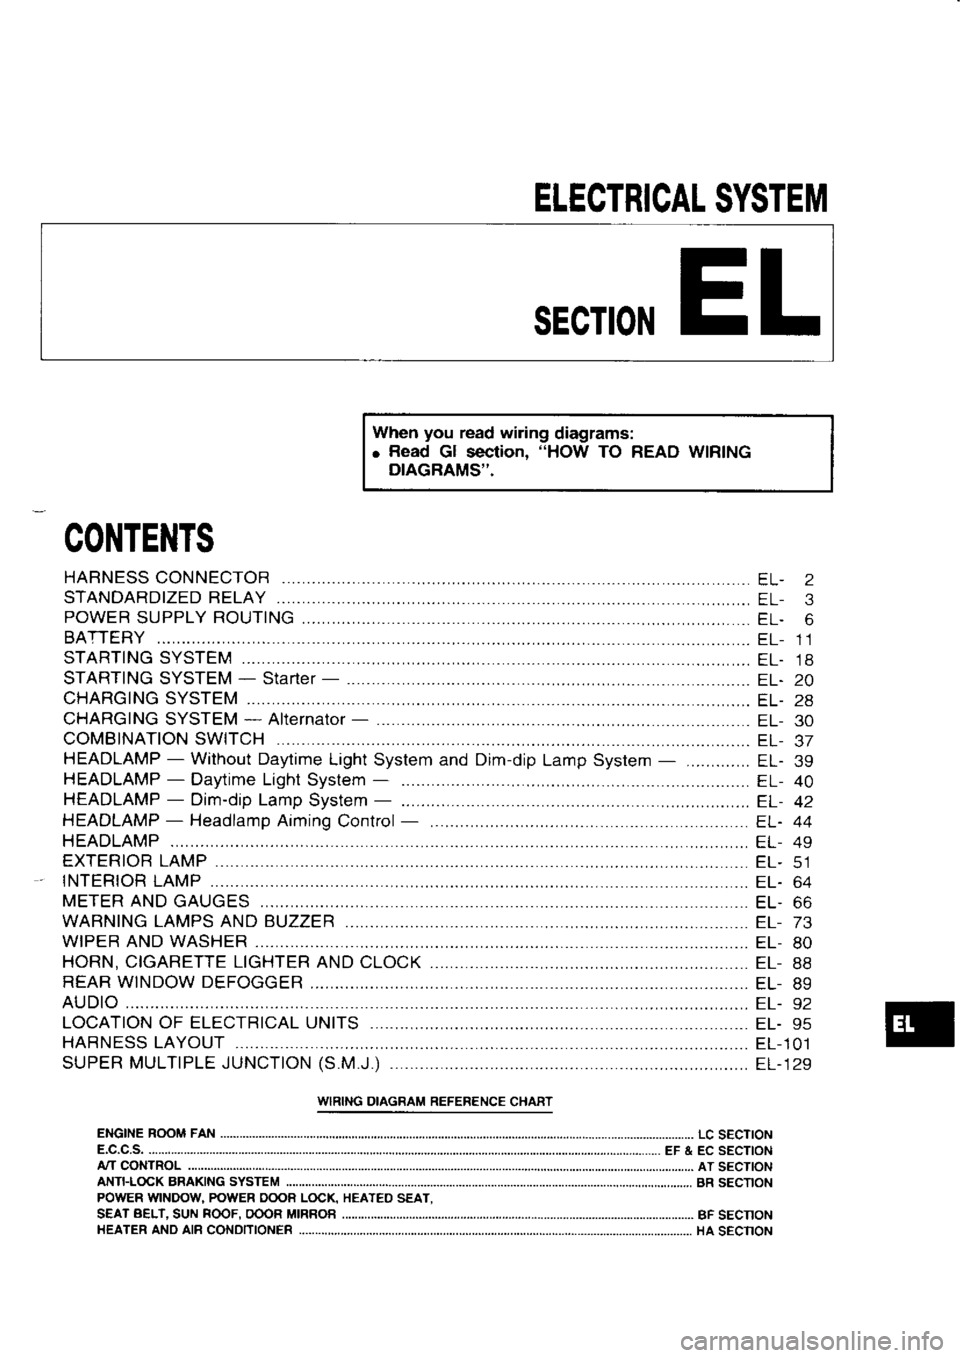 NISSAN SERENA 1993  Service Repair Manual ELECTRICAL 
SYSTEM
SECTION EL
When  you 
read  wiring 
diagrams:
o  Read 
Gl section,  "HOW 
TO READ  WIRING
DIAGRAMS.
CONTENTS
STARTING  SYSTEM
STARTING  SYSTEM - 
Starter  - 
...
CHARGING  SYSTEM
